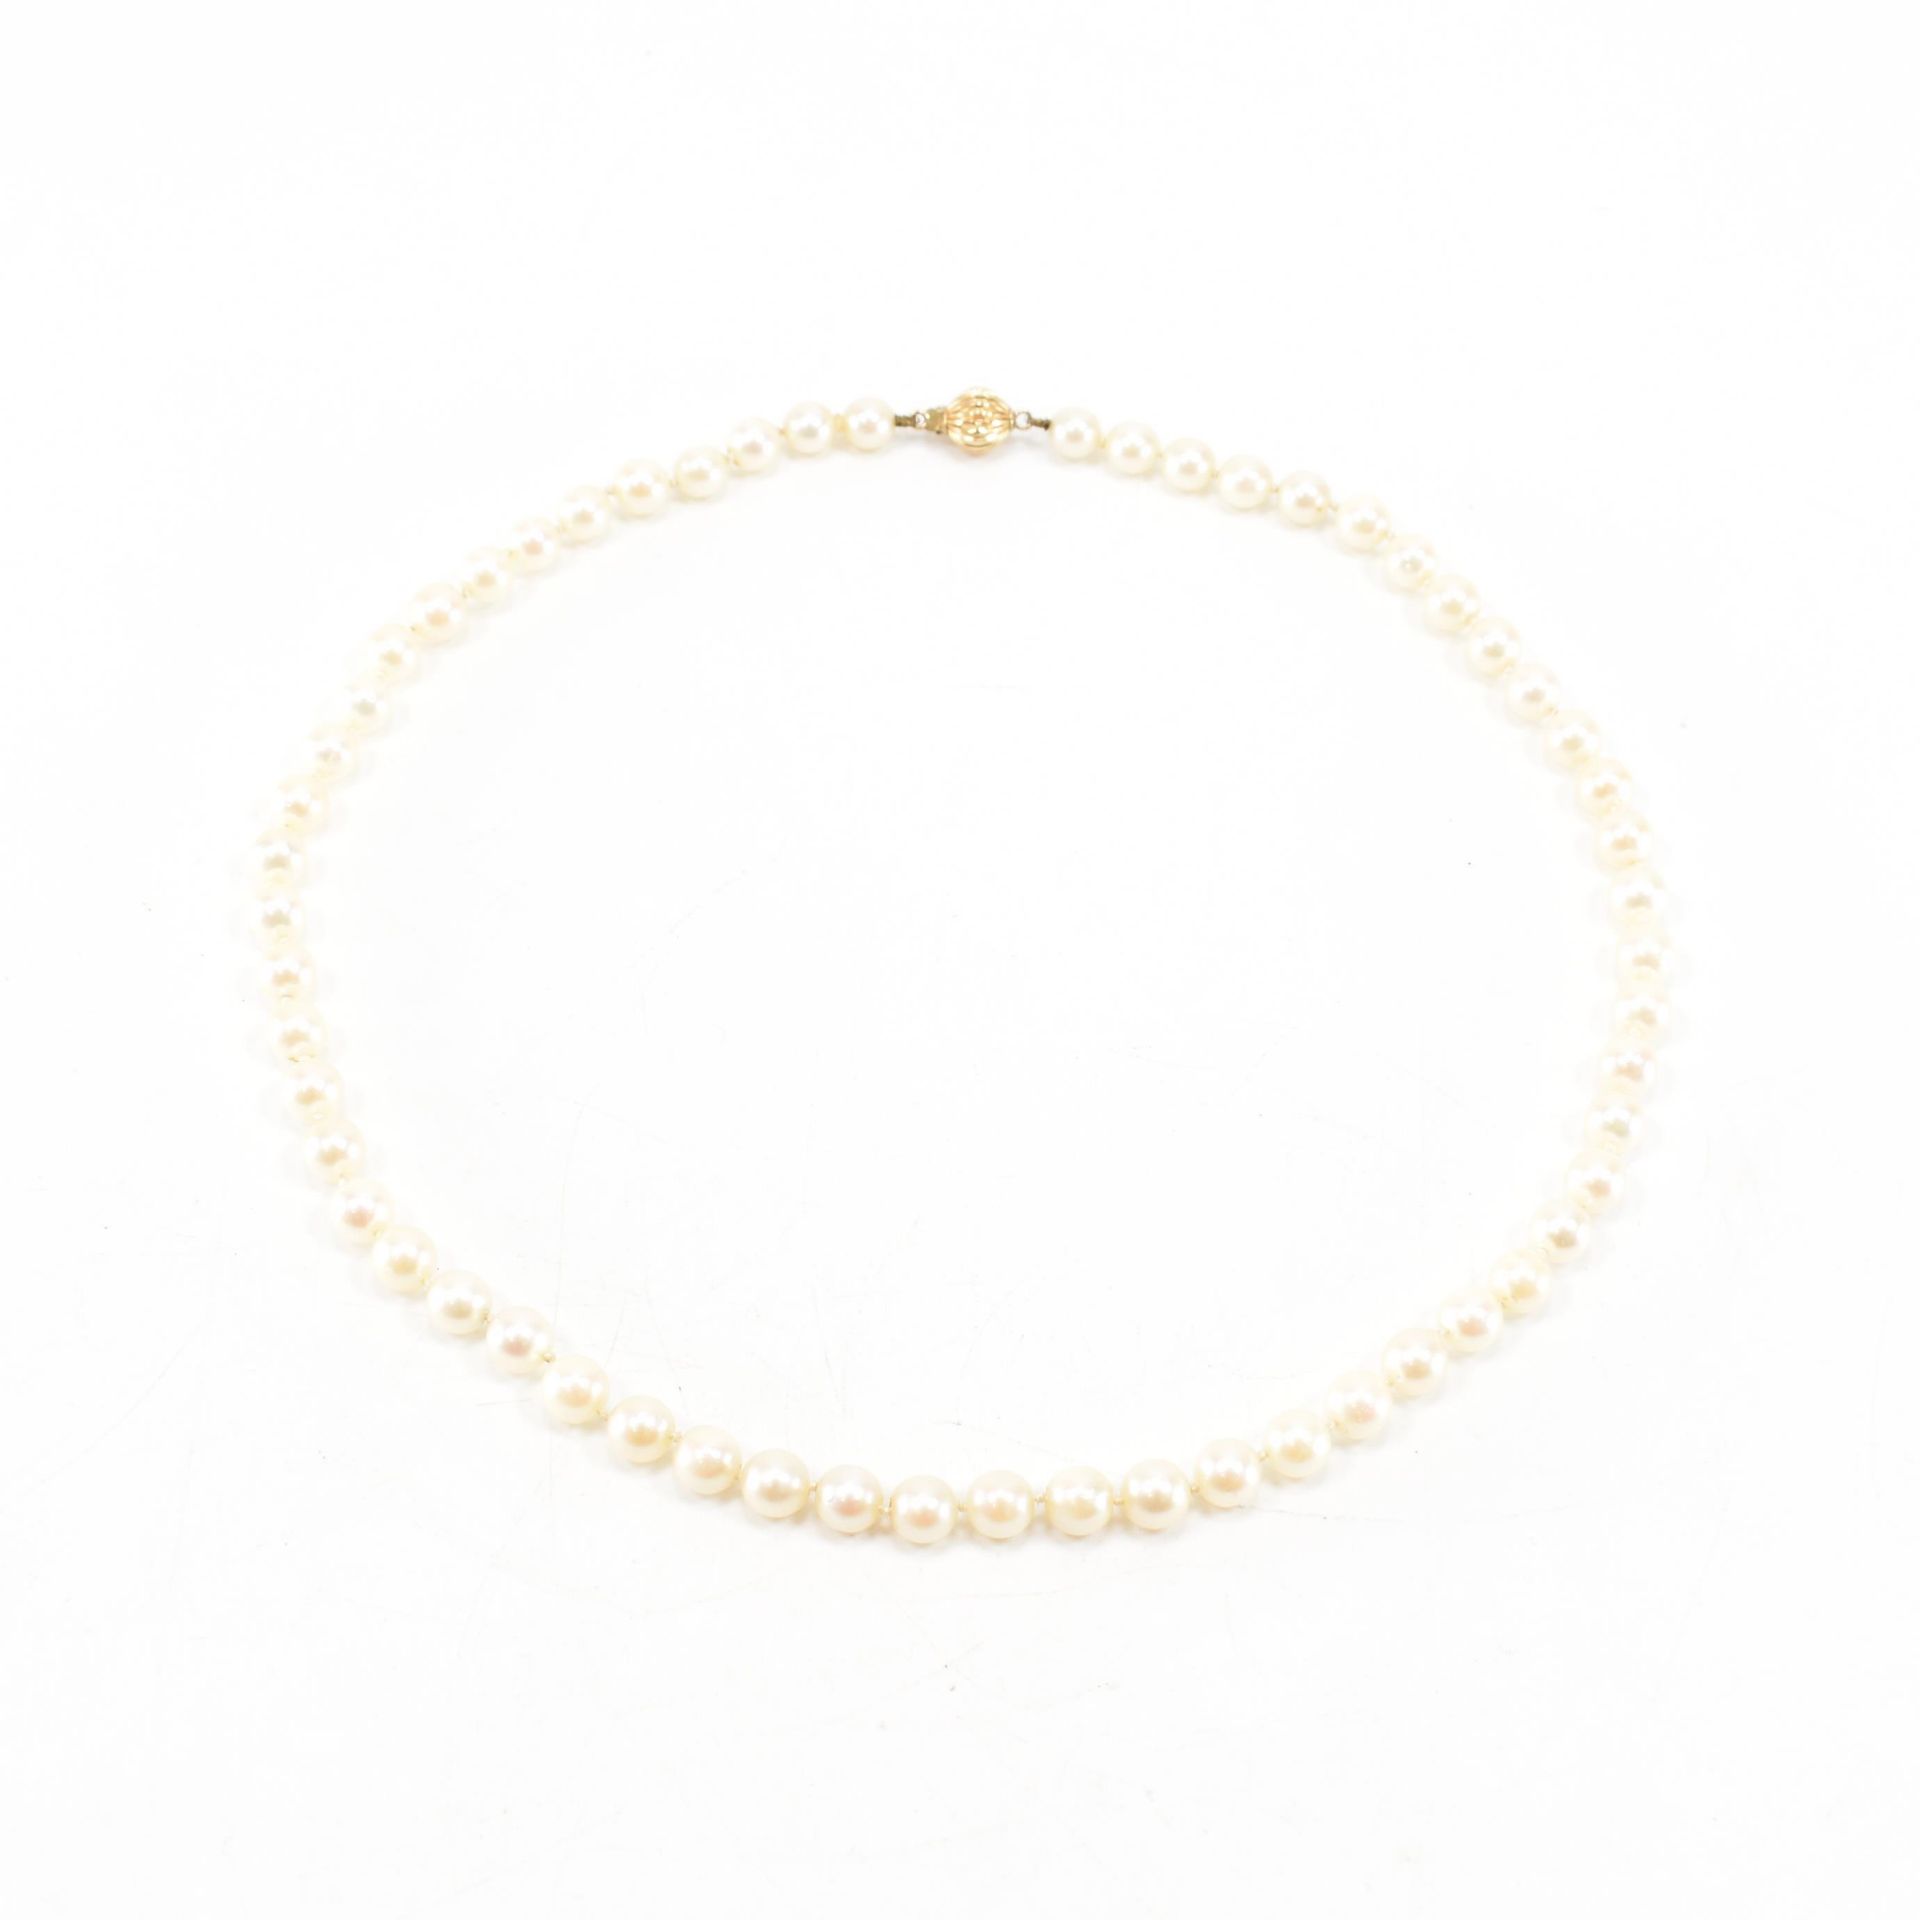 GOLD & CULTURED PEARL NECKLACE - Image 3 of 3